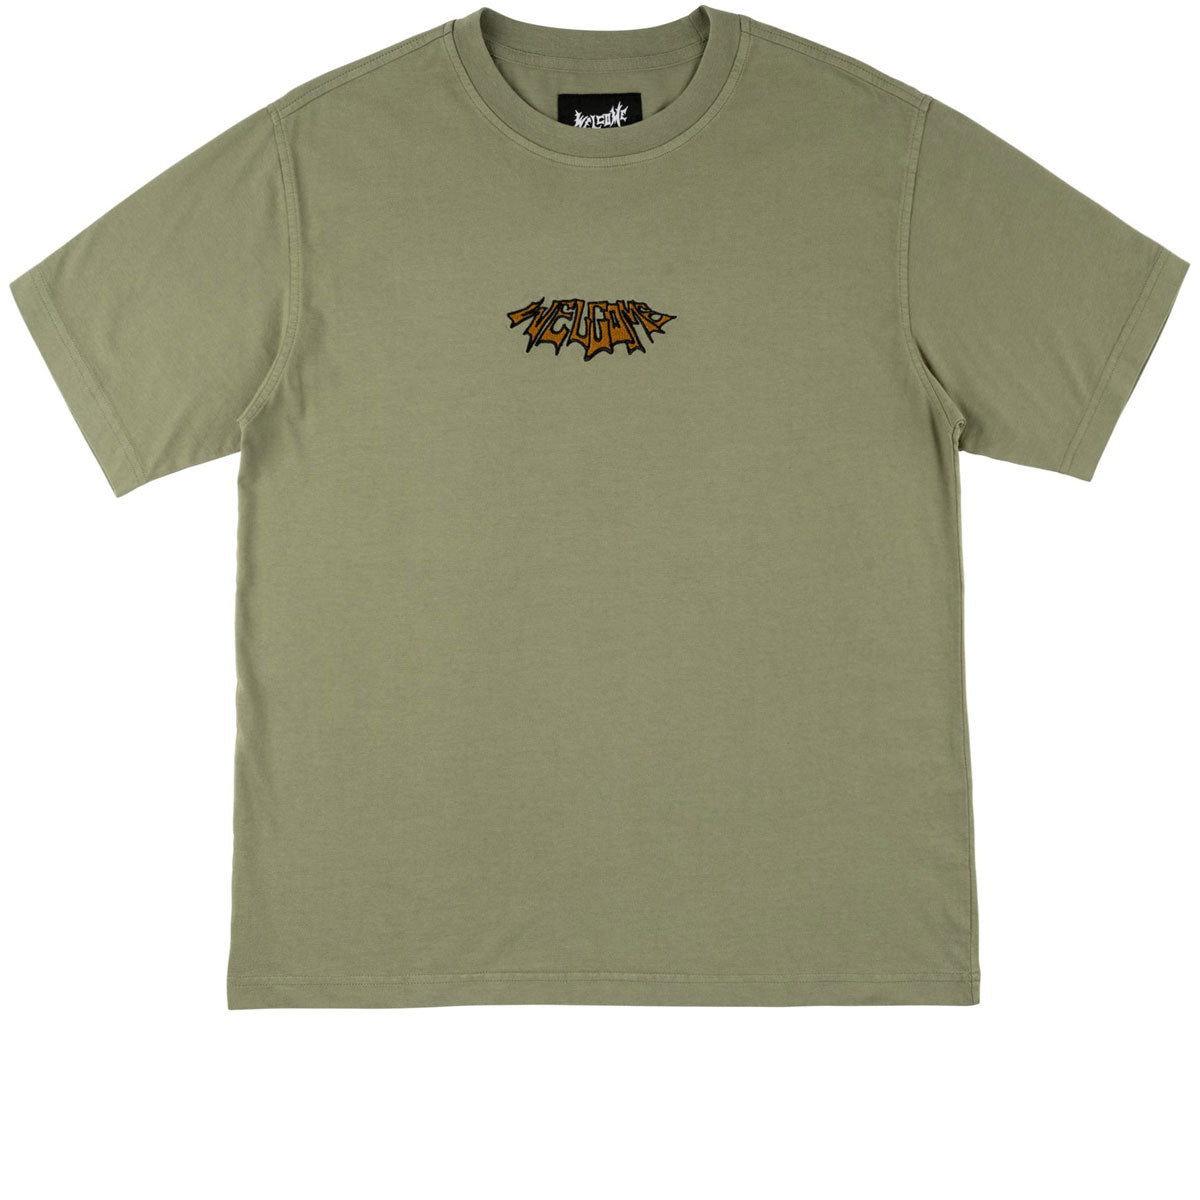 Welcome Shell Shirt - Olive image 1